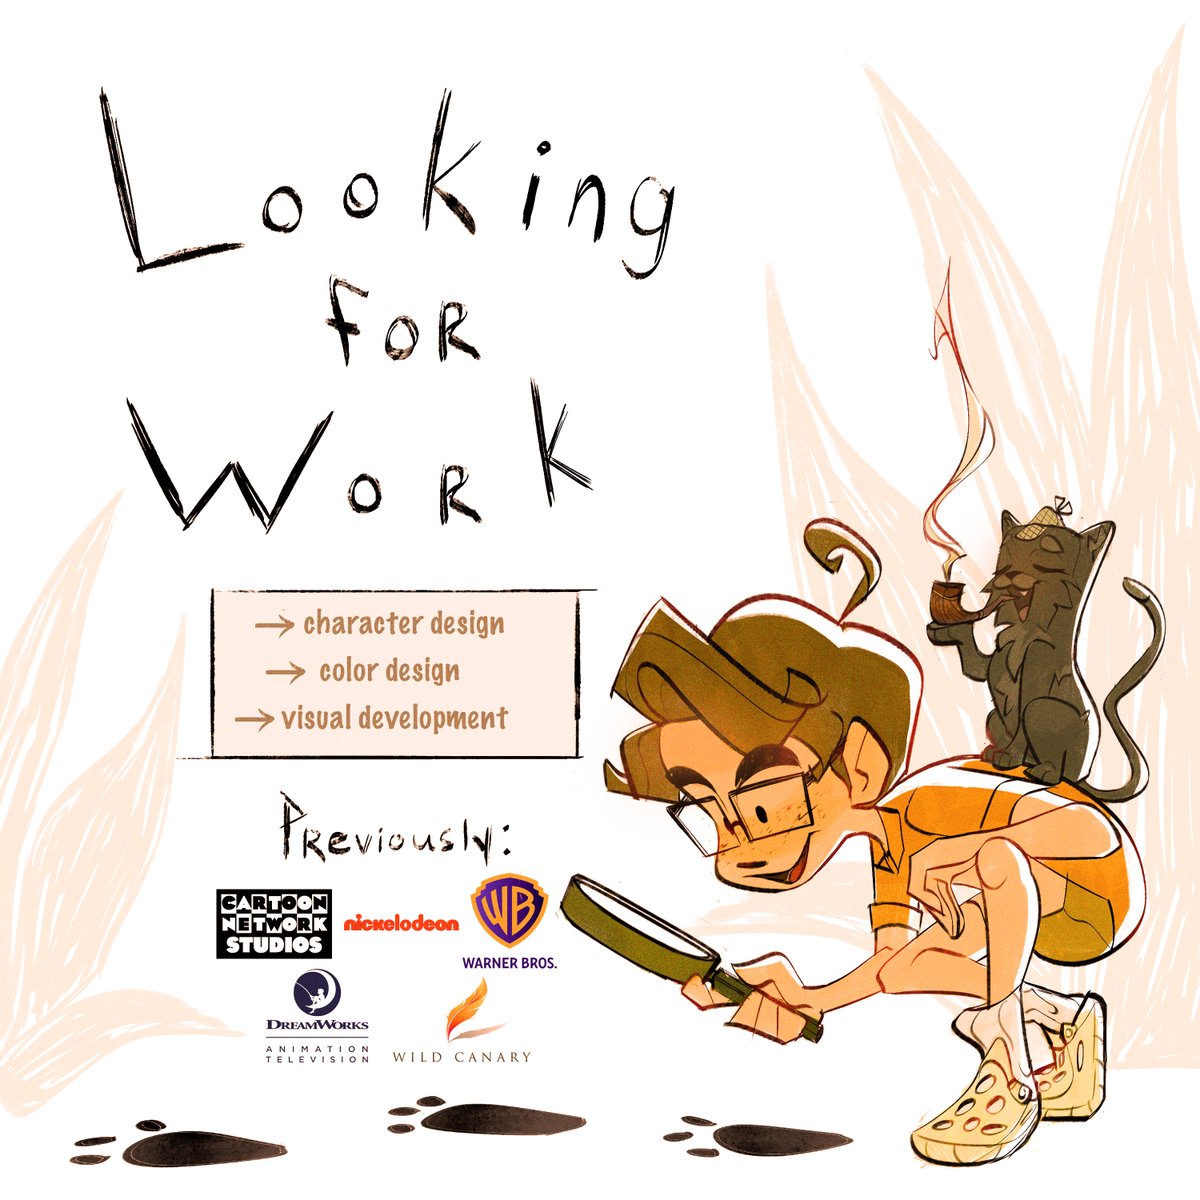 [ RTs Appreciated! ]   hey besties!! just wrapped at CN and on the hunt for character or color deign opportunities!! i have 2D and CG show experience and love to crack bad dad jokes in design reviews!   💌 zachsgotyourbac@gmail.com  📷 zacharyclarkson.com